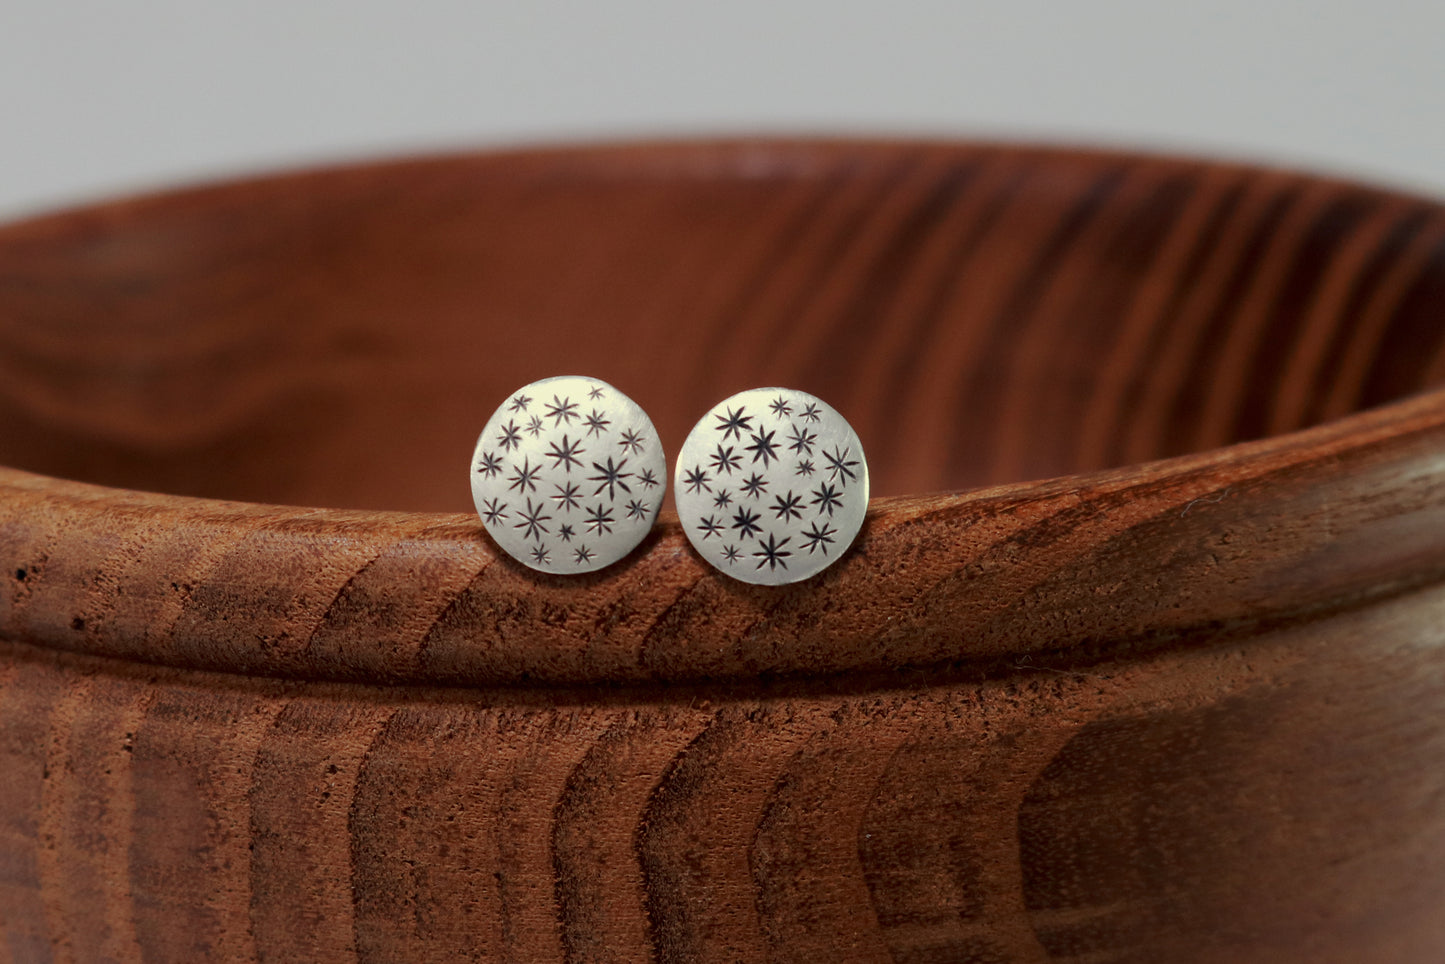 A pair of round, domed, silver, stud earrings with hand carved black stars.